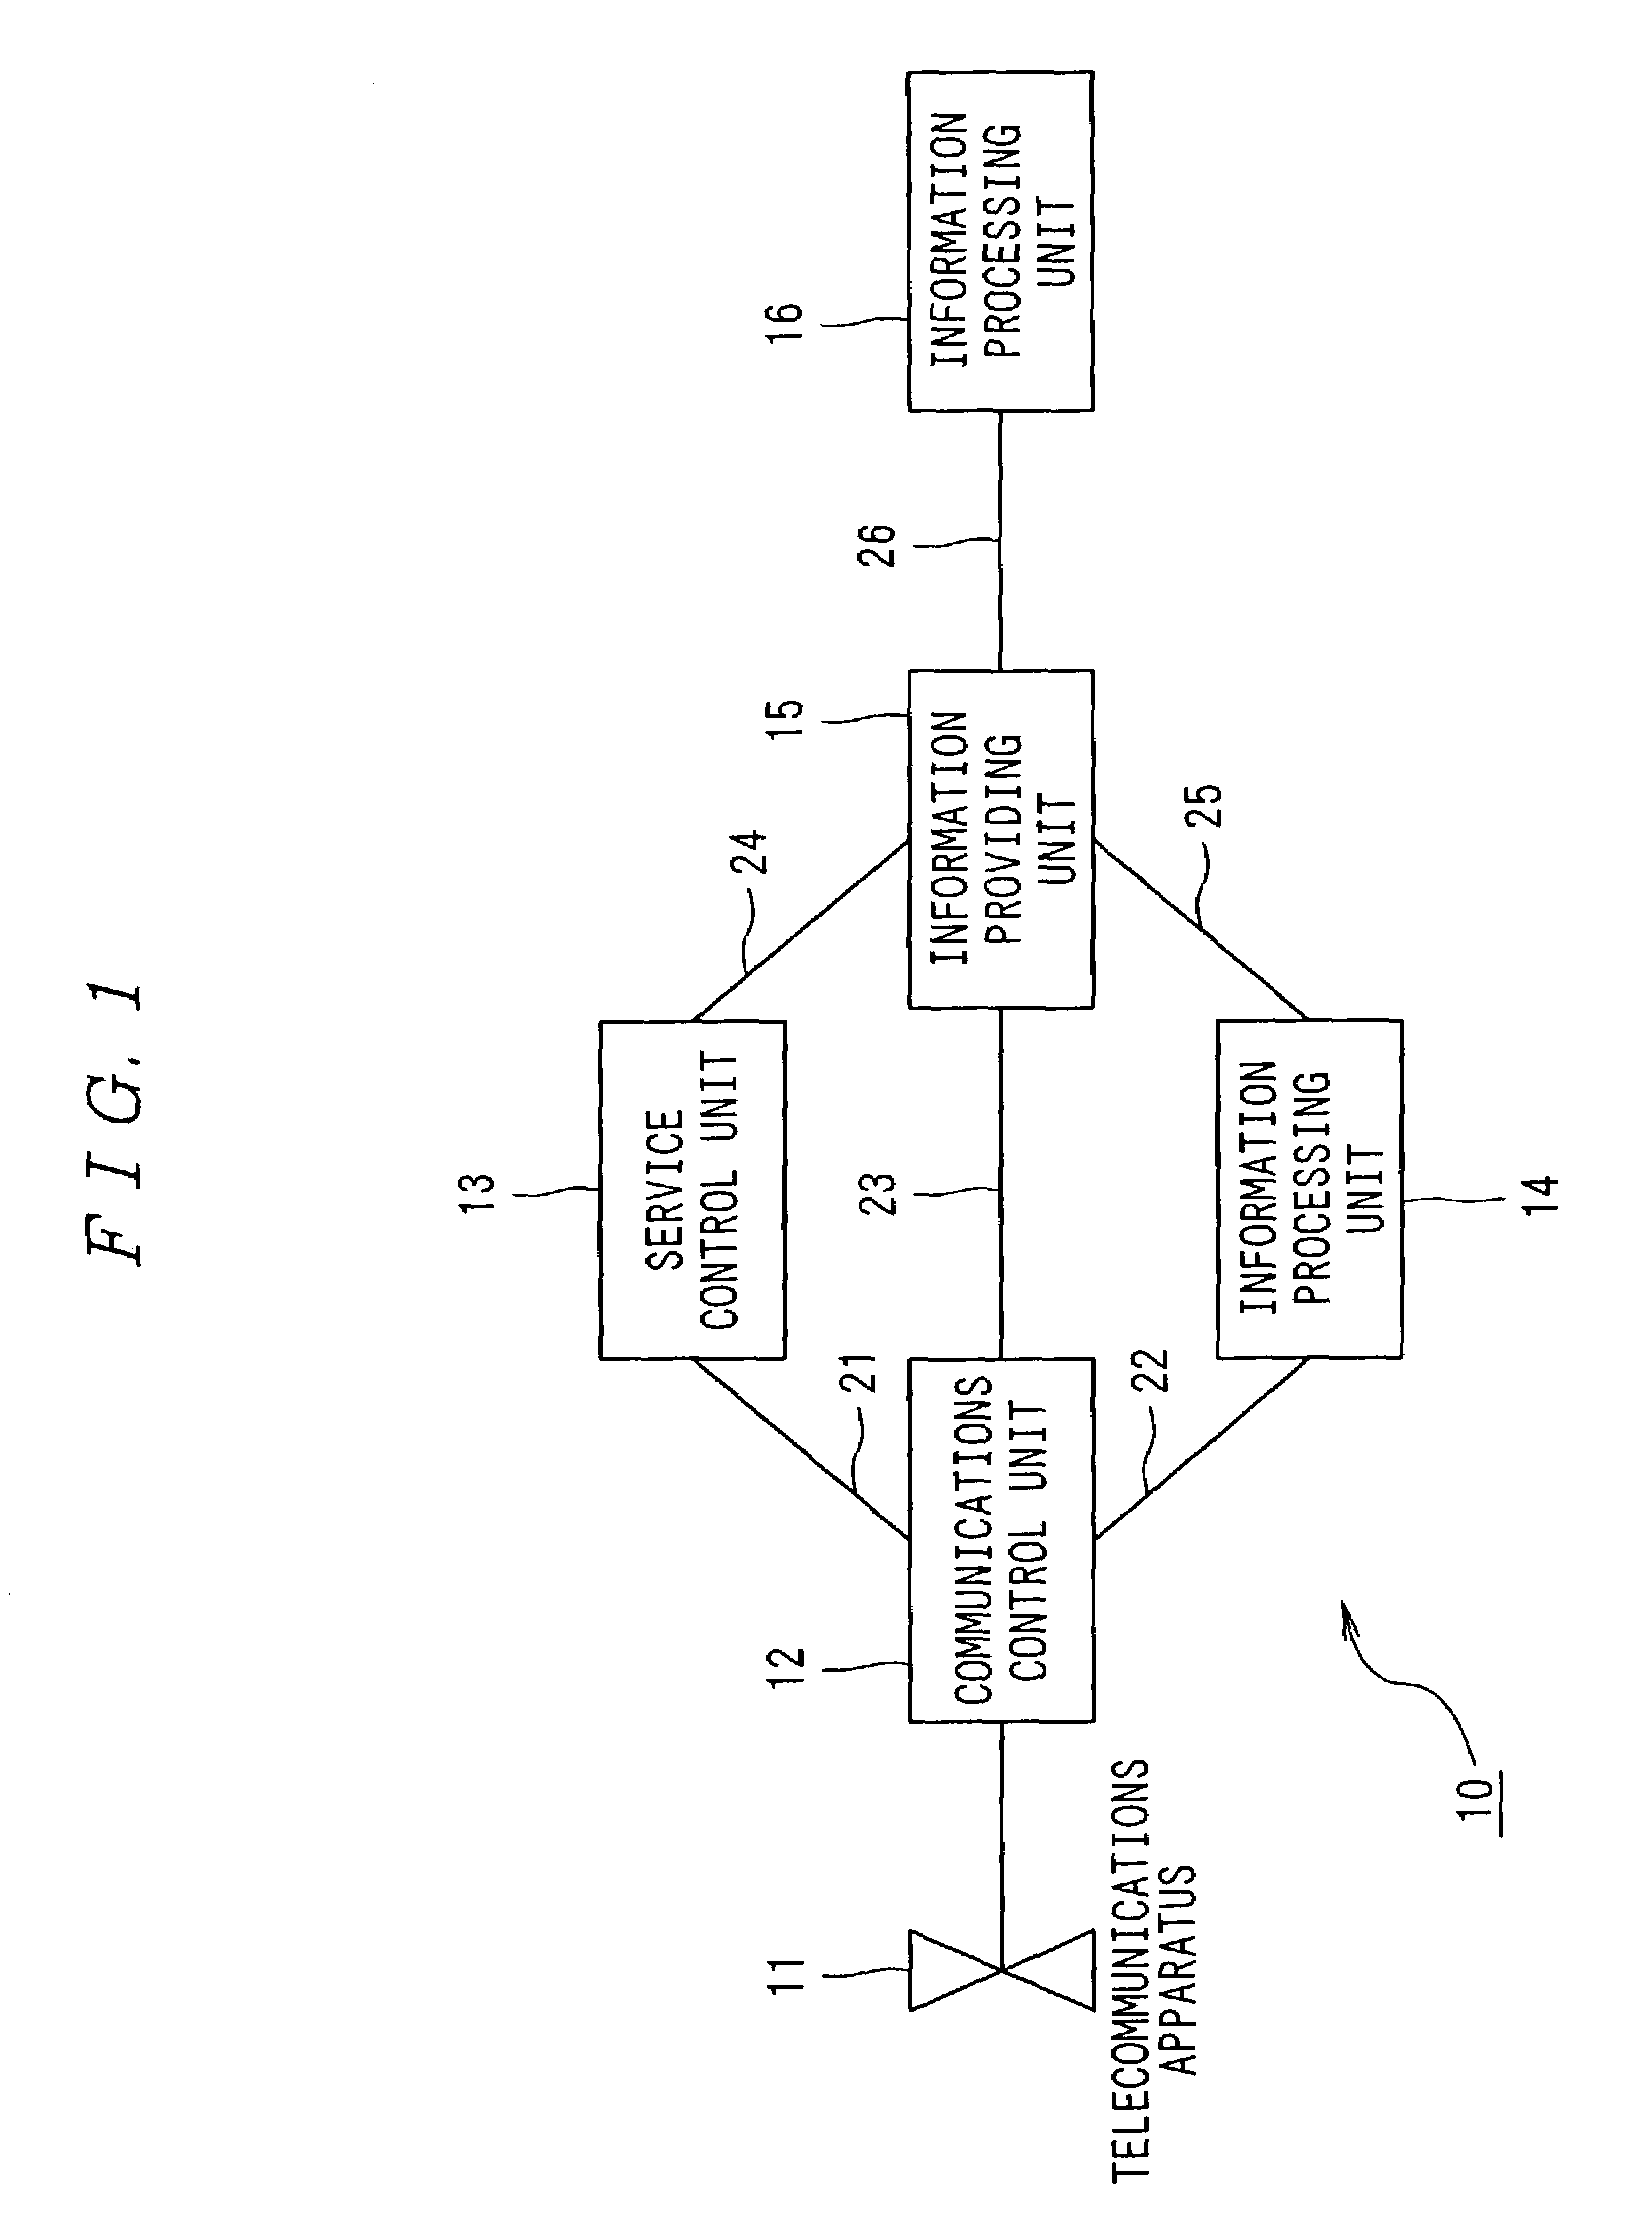 Communication request processing system communication request processing method communication request processing apparatus